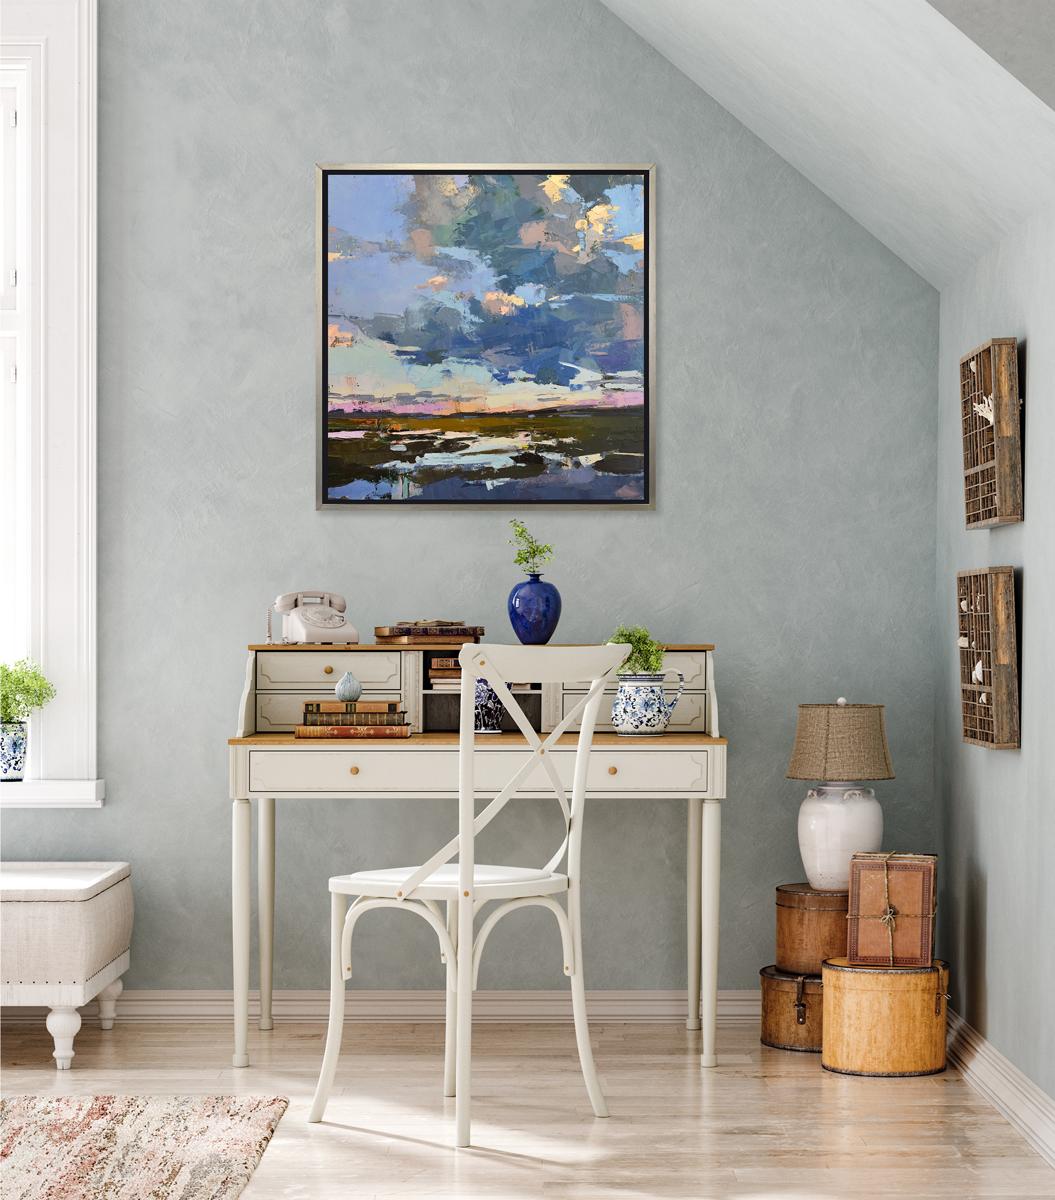 This Limited Edition giclee abstracted coastal landscape print by Bri Custer is an edition size of 195. It features a blue palette with warm pink and orange accents throughout.  Printed on canvas, this giclee ships framed in a warm silver floater